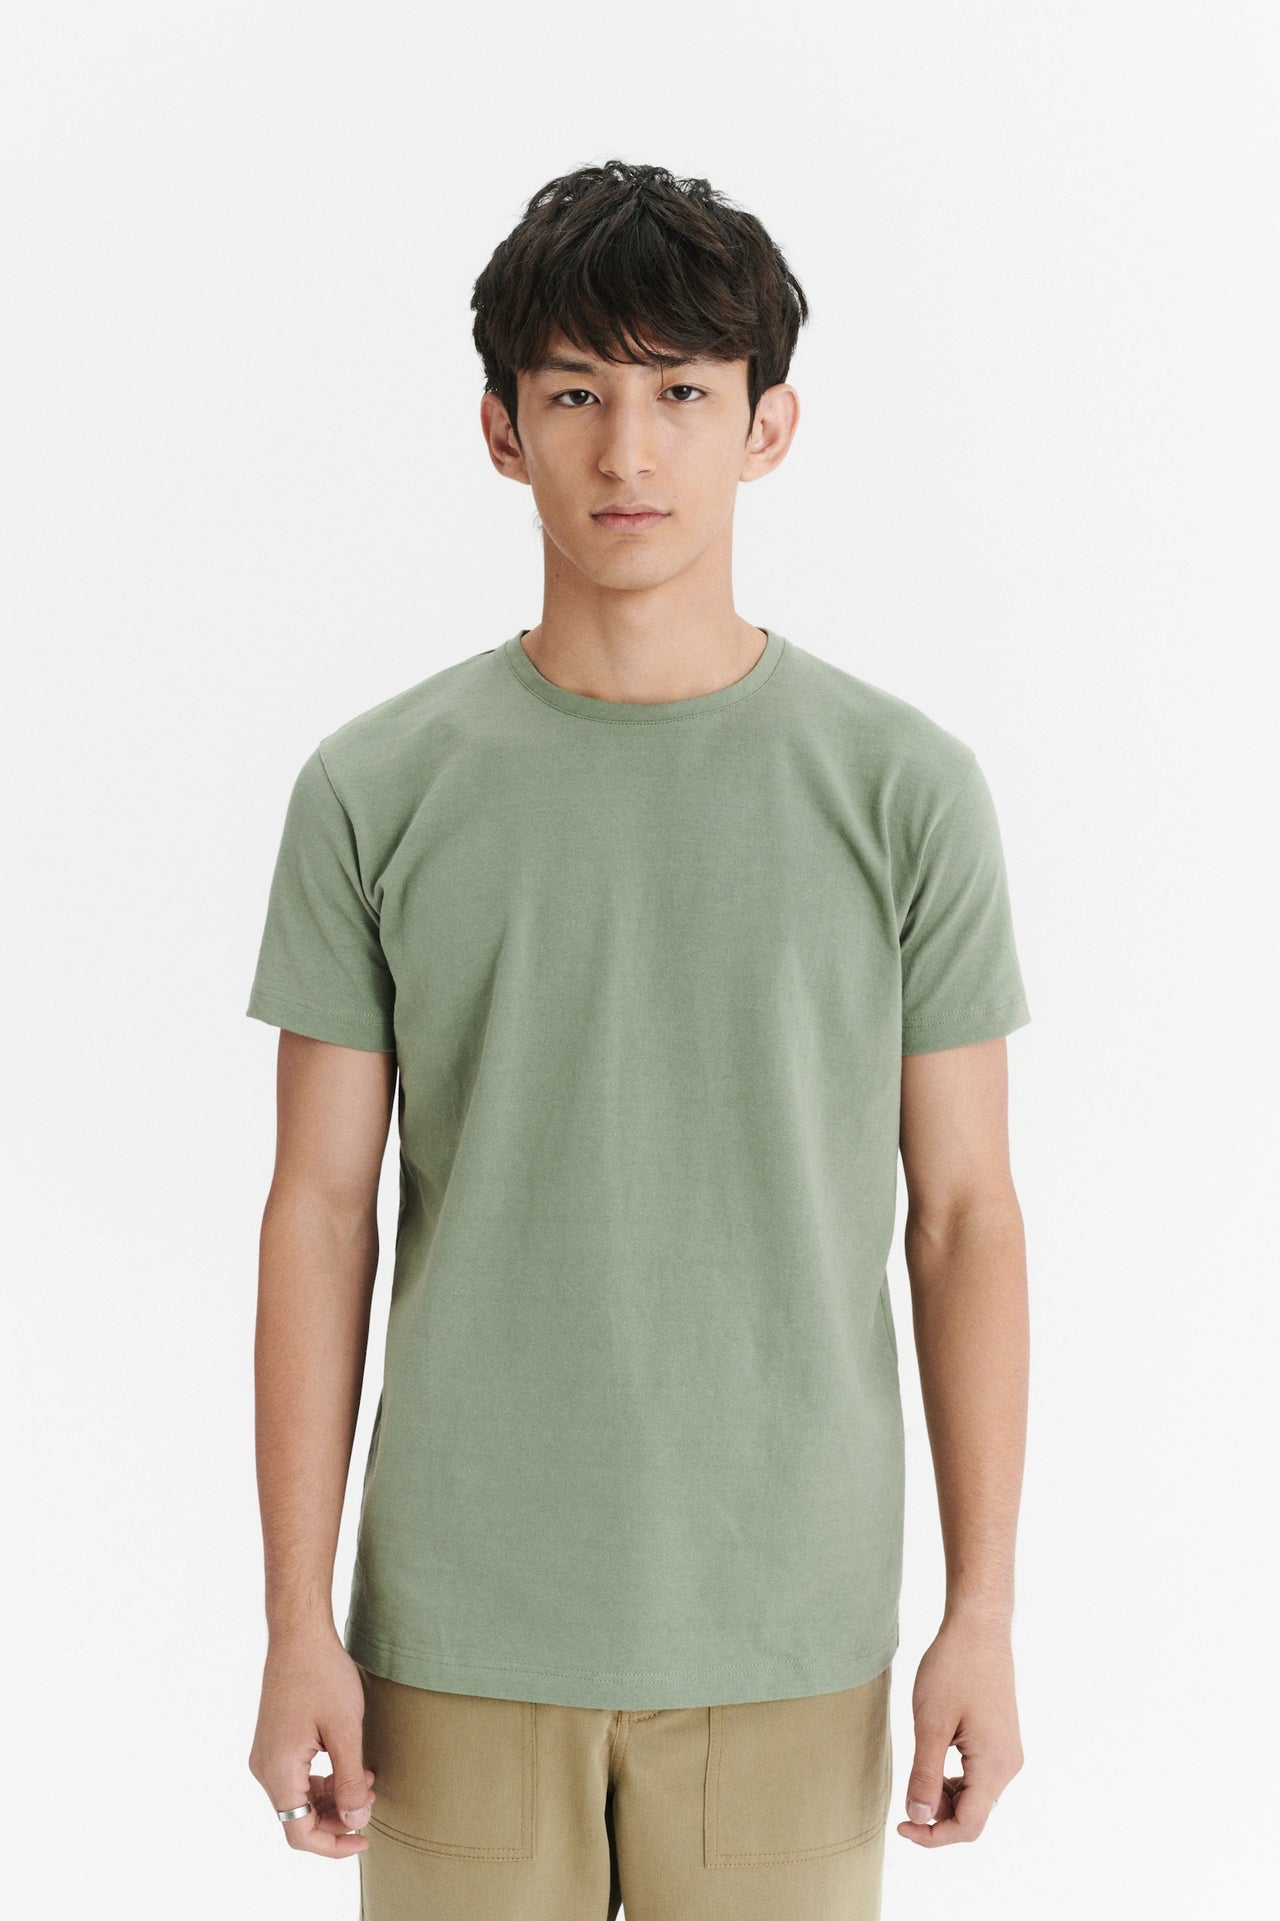 Relaxed T-Shirt in a Green Sage Japanese Sturdy Cotton Jersey